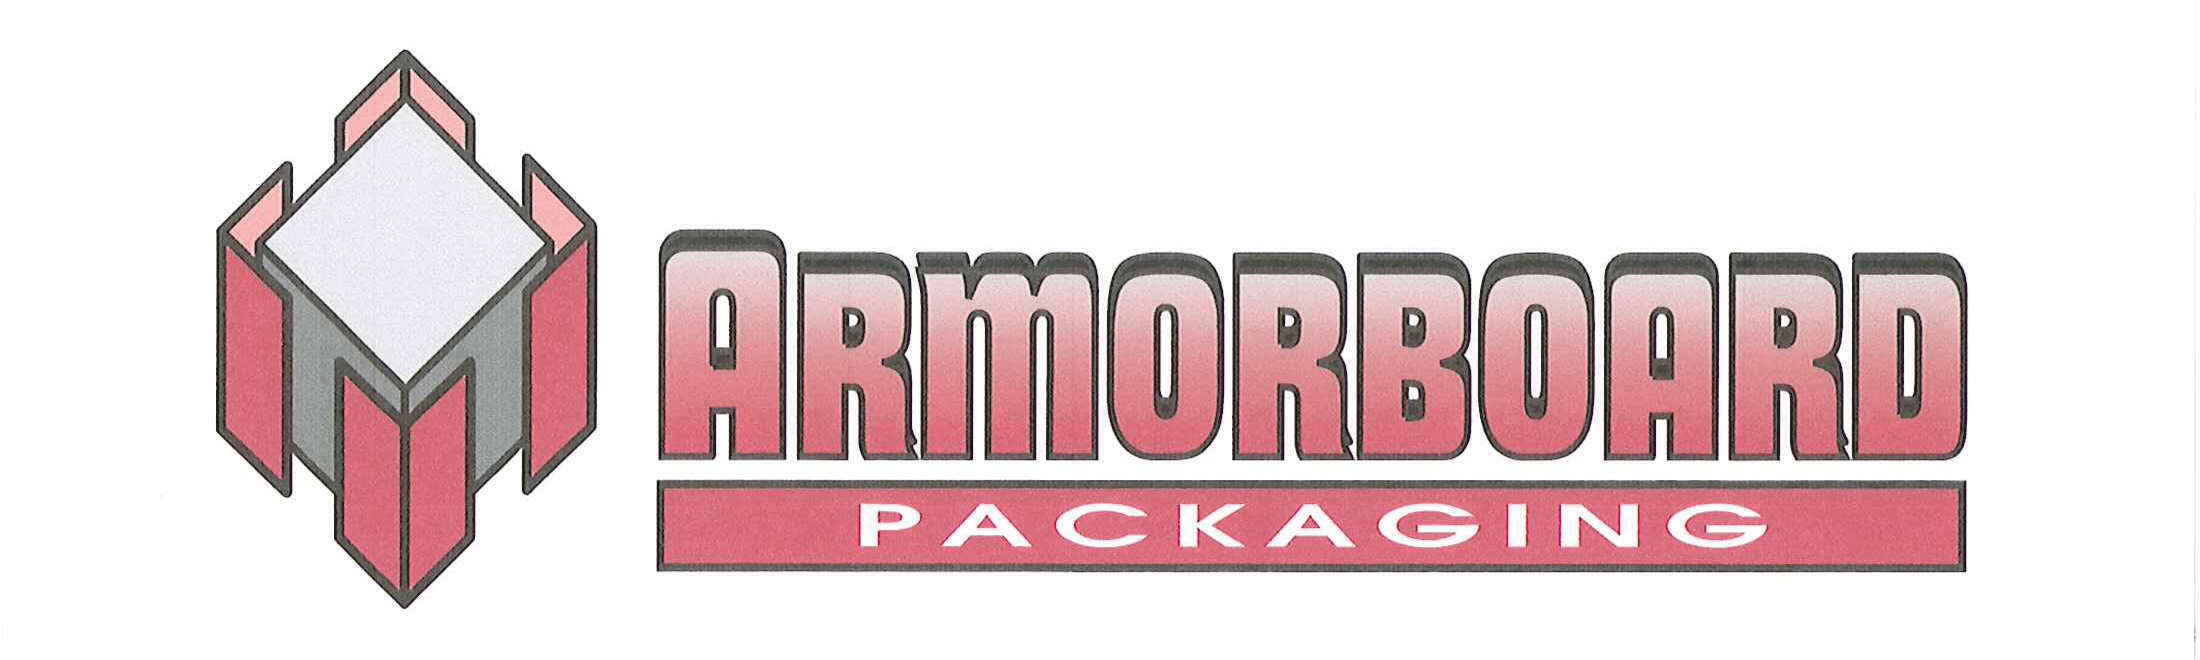 Armorboard Packaging